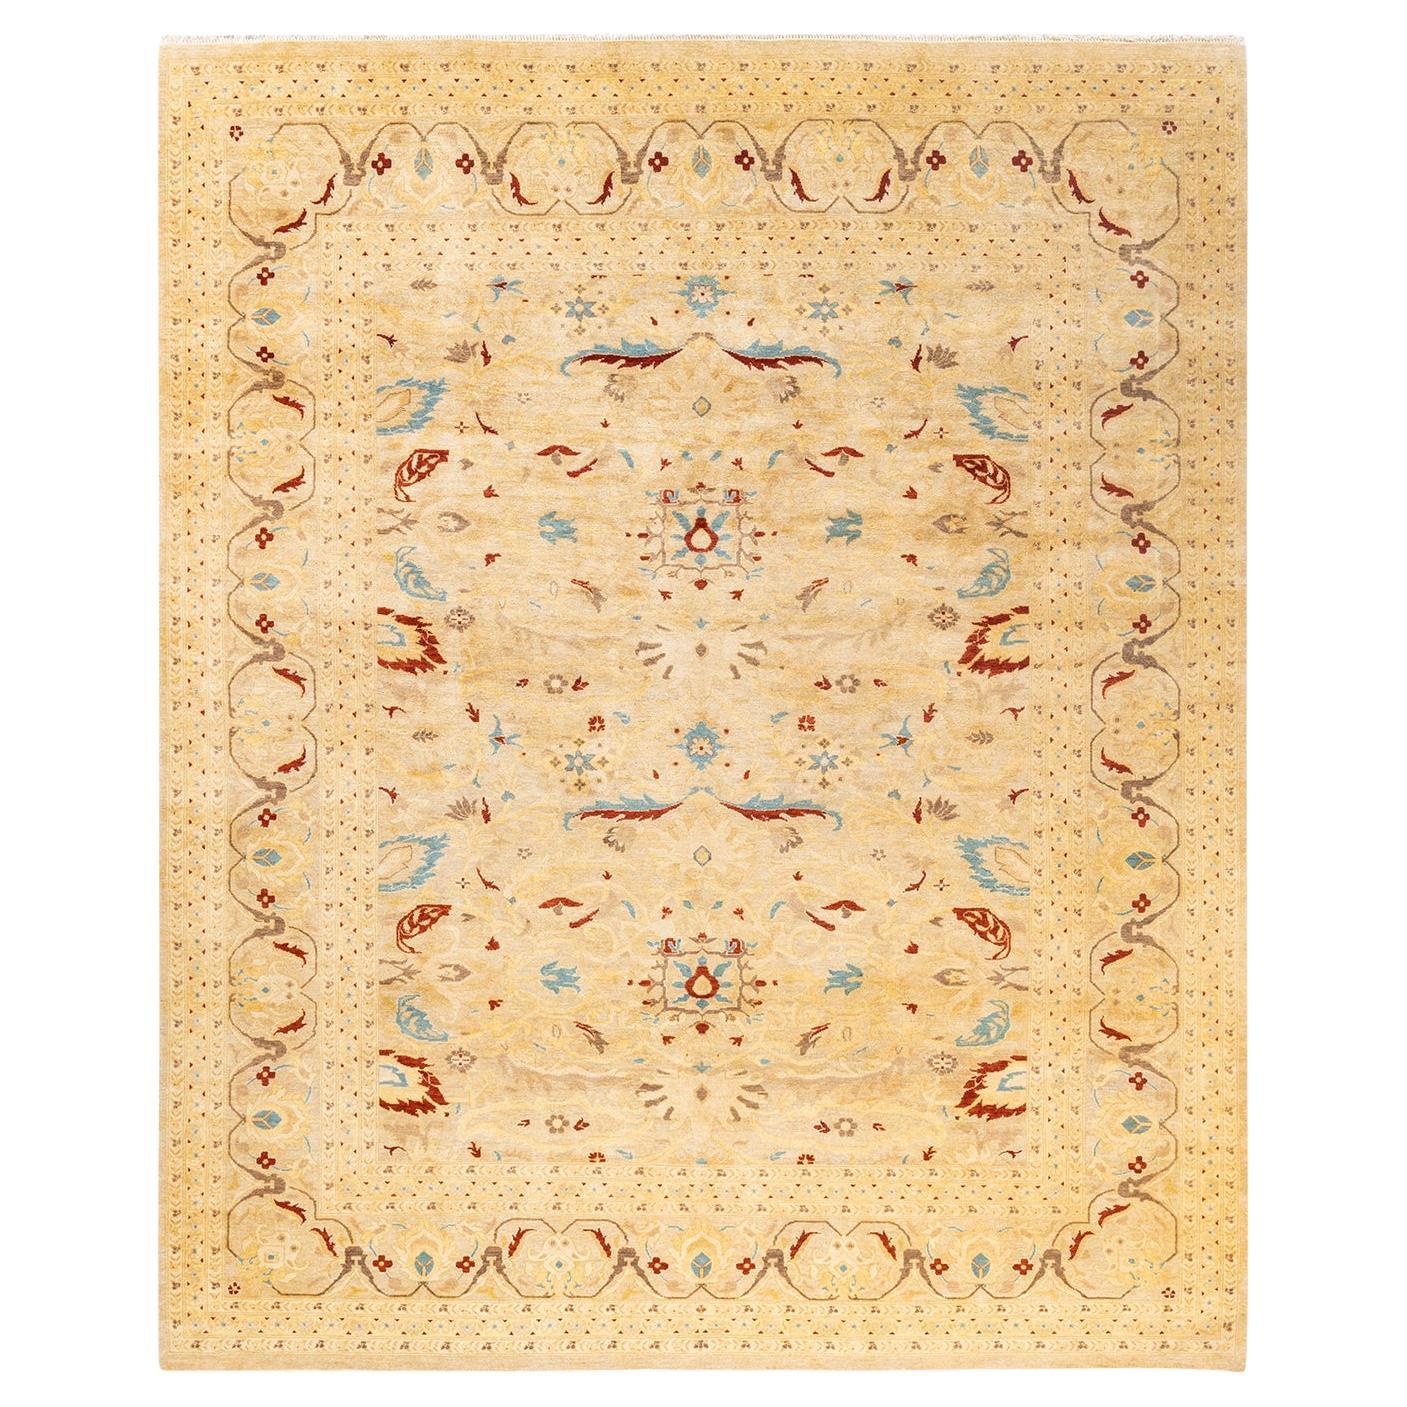 One-Of-A-Kind Hand Knotted Floral Eclectic Ivory Area Rug